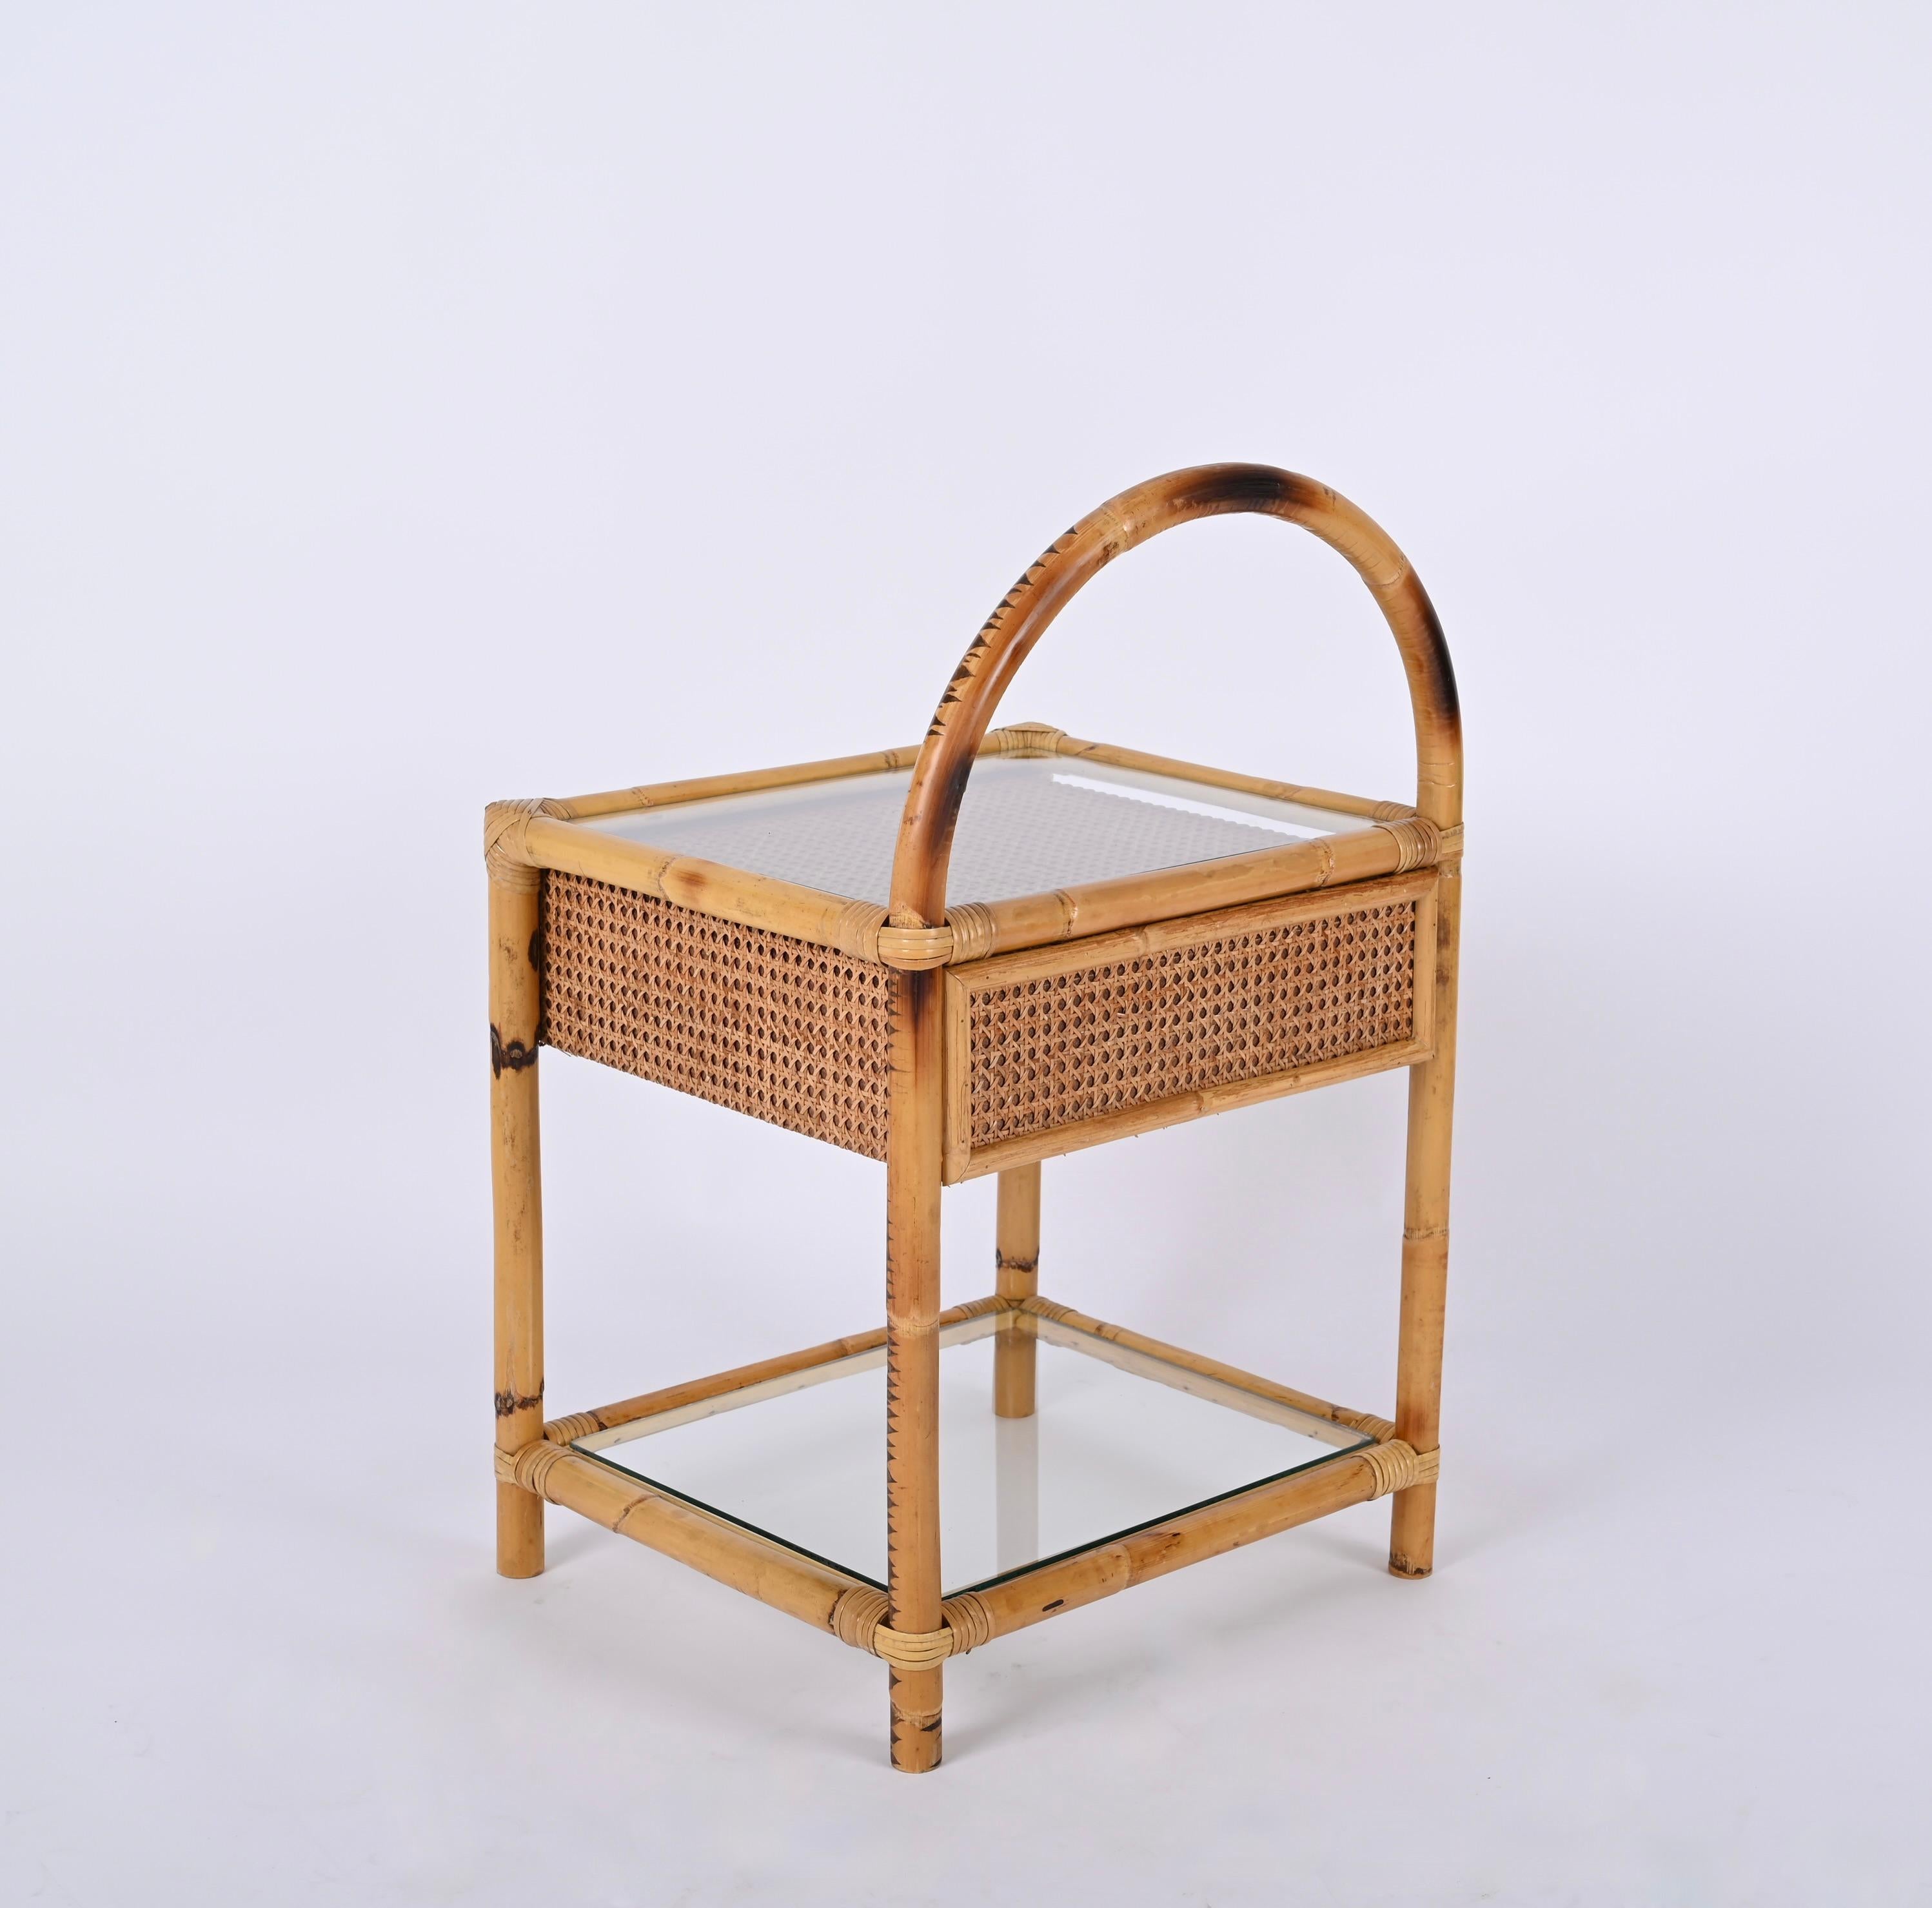 Pair of Mid-Century Bamboo, Rattan and Wicker Italian Bedside Tables, 1970s For Sale 7